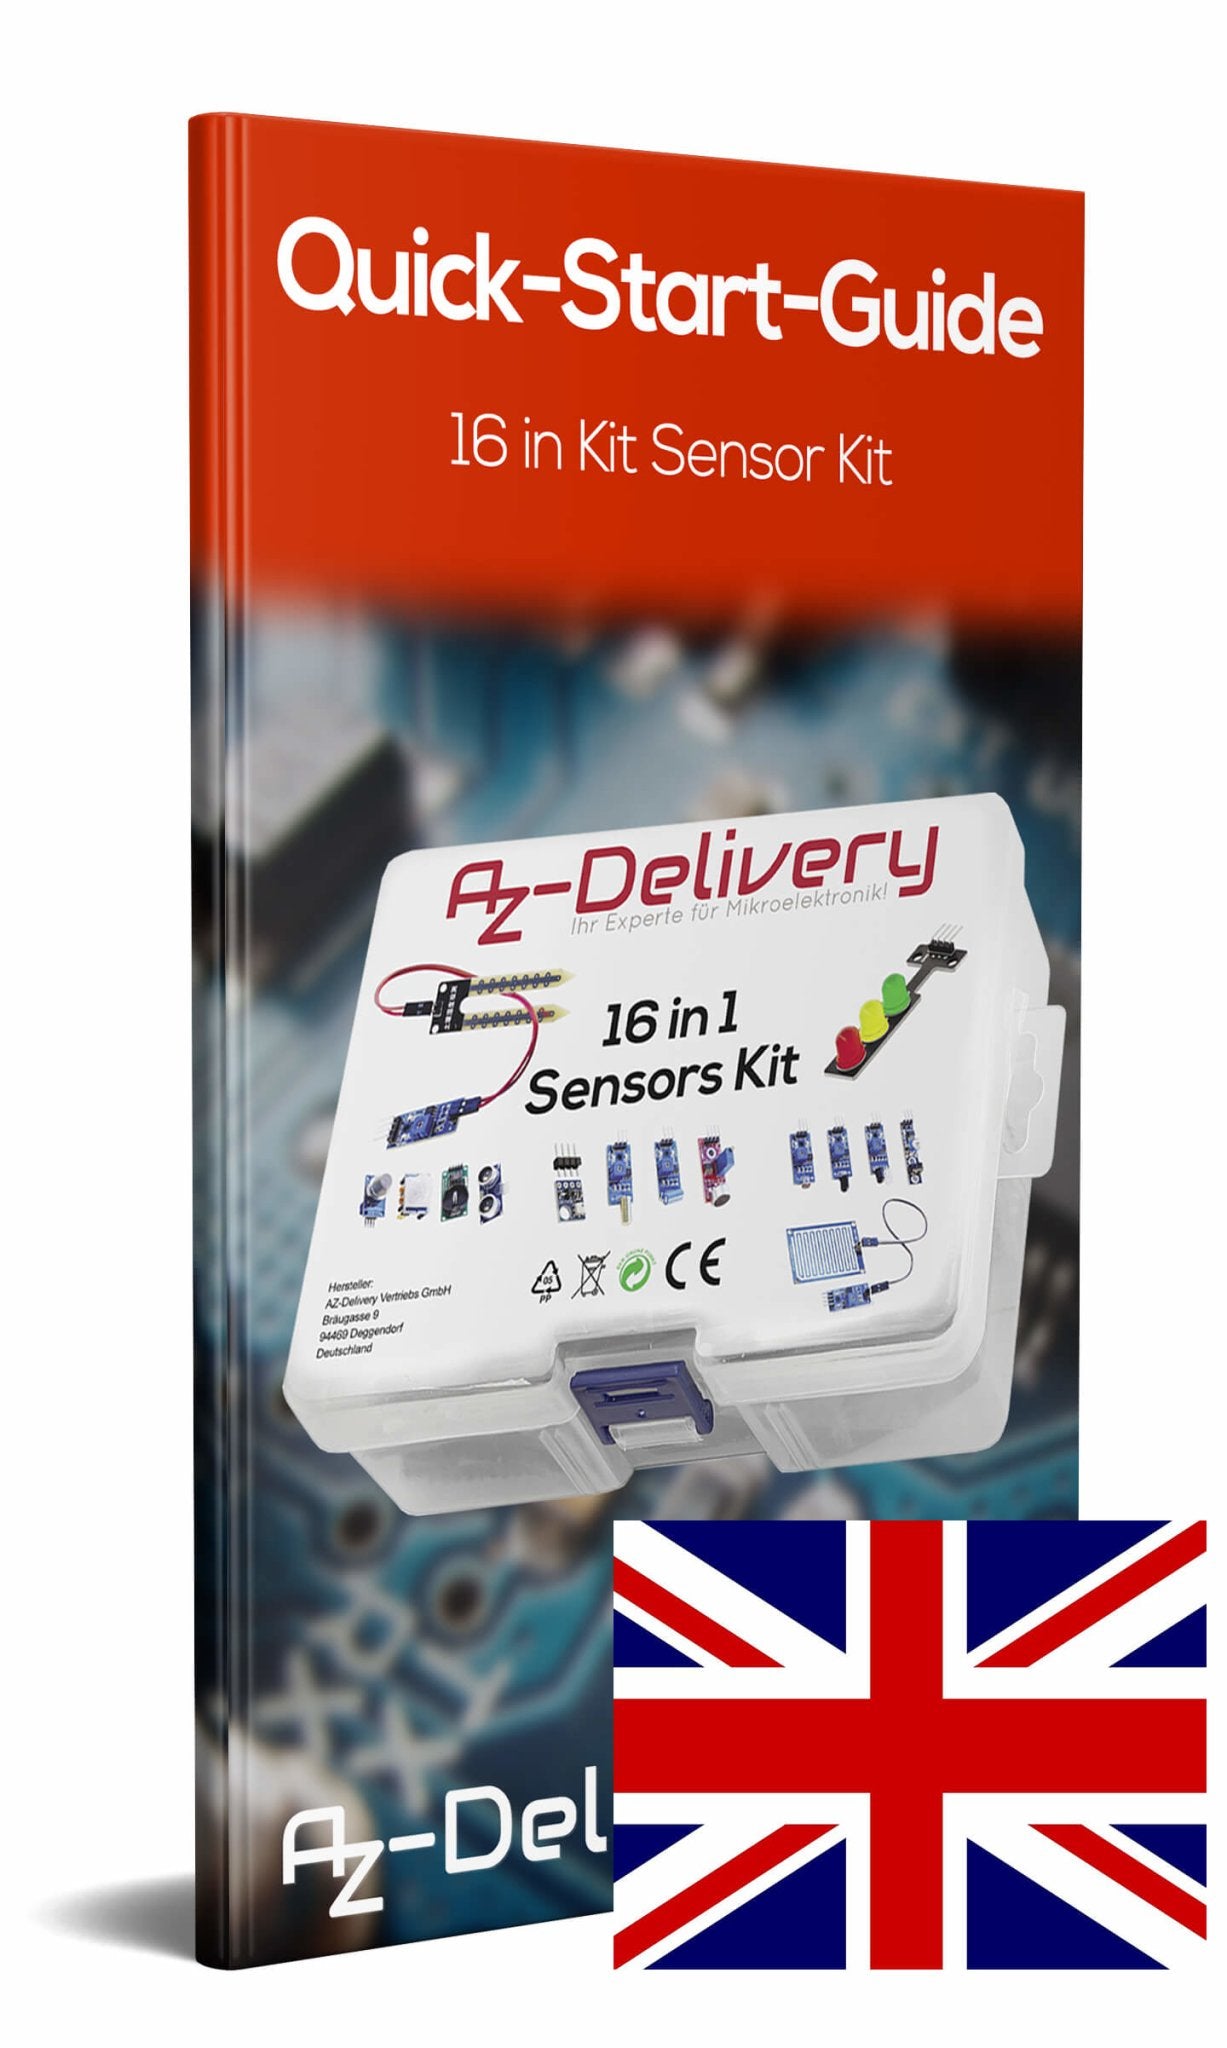 16 In 1 kit accessory set with sensors and modules for Raspberry Pi